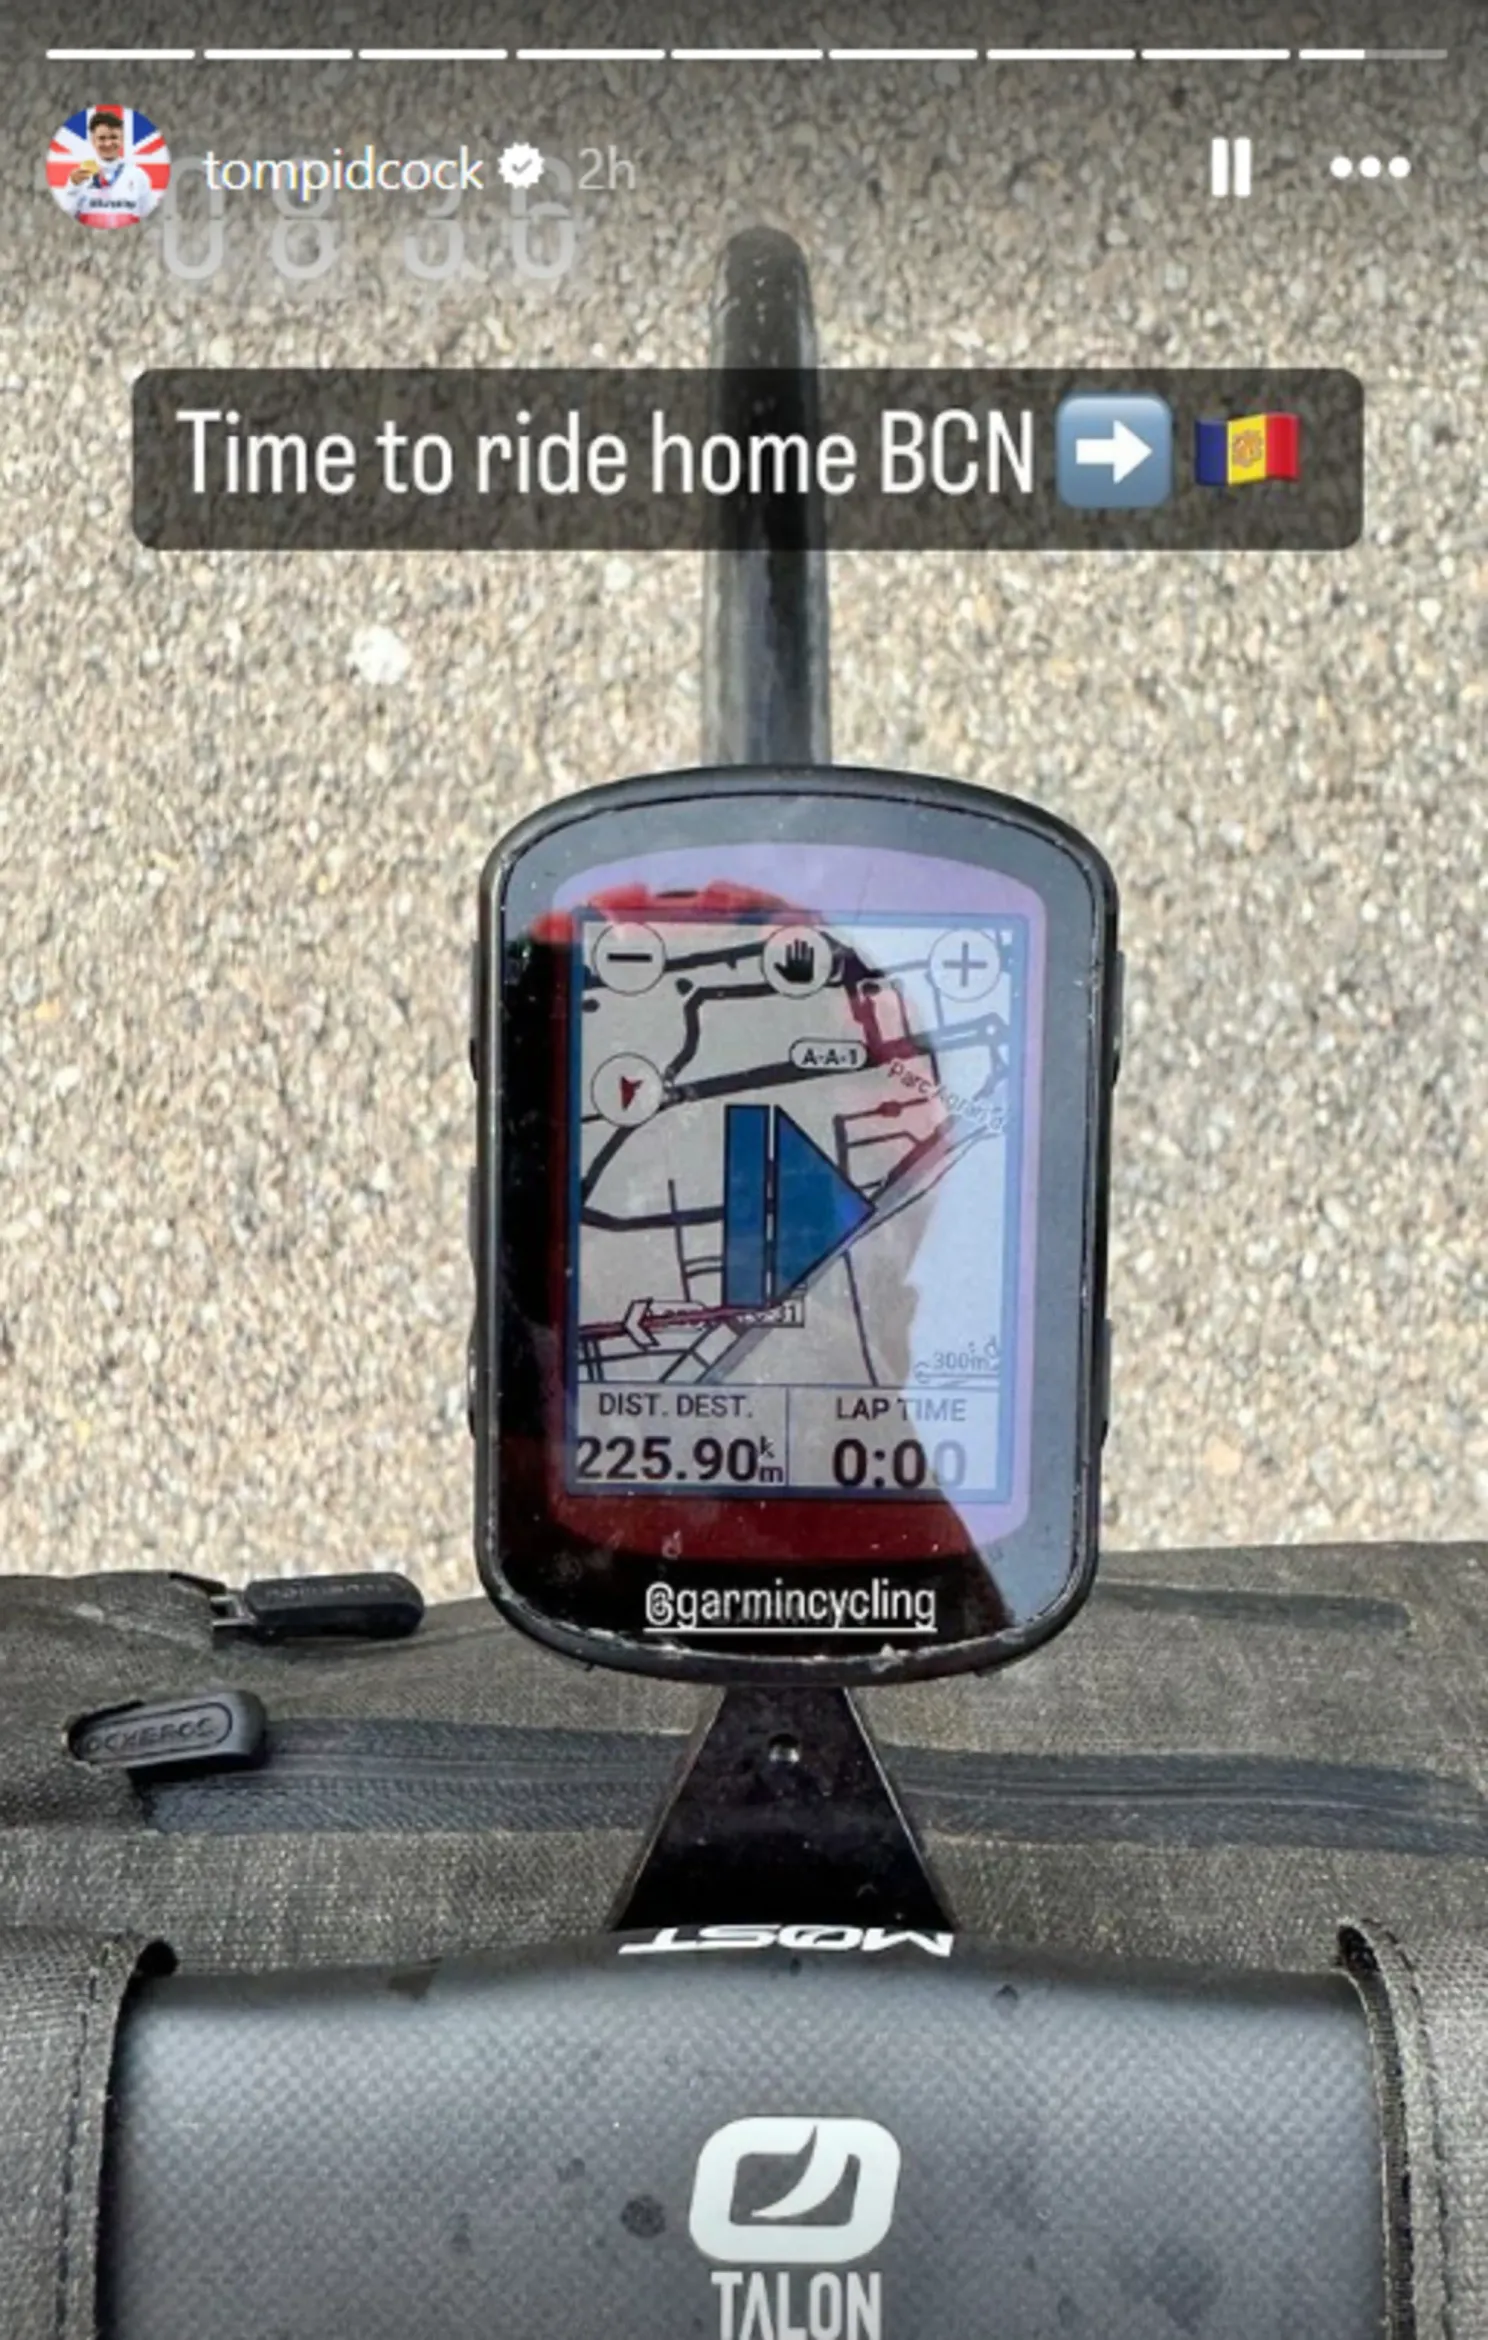 After World Cup XCO win Tom Pidcock steps up Tour de France preparation with ride home from Barcelona airport to Andorra